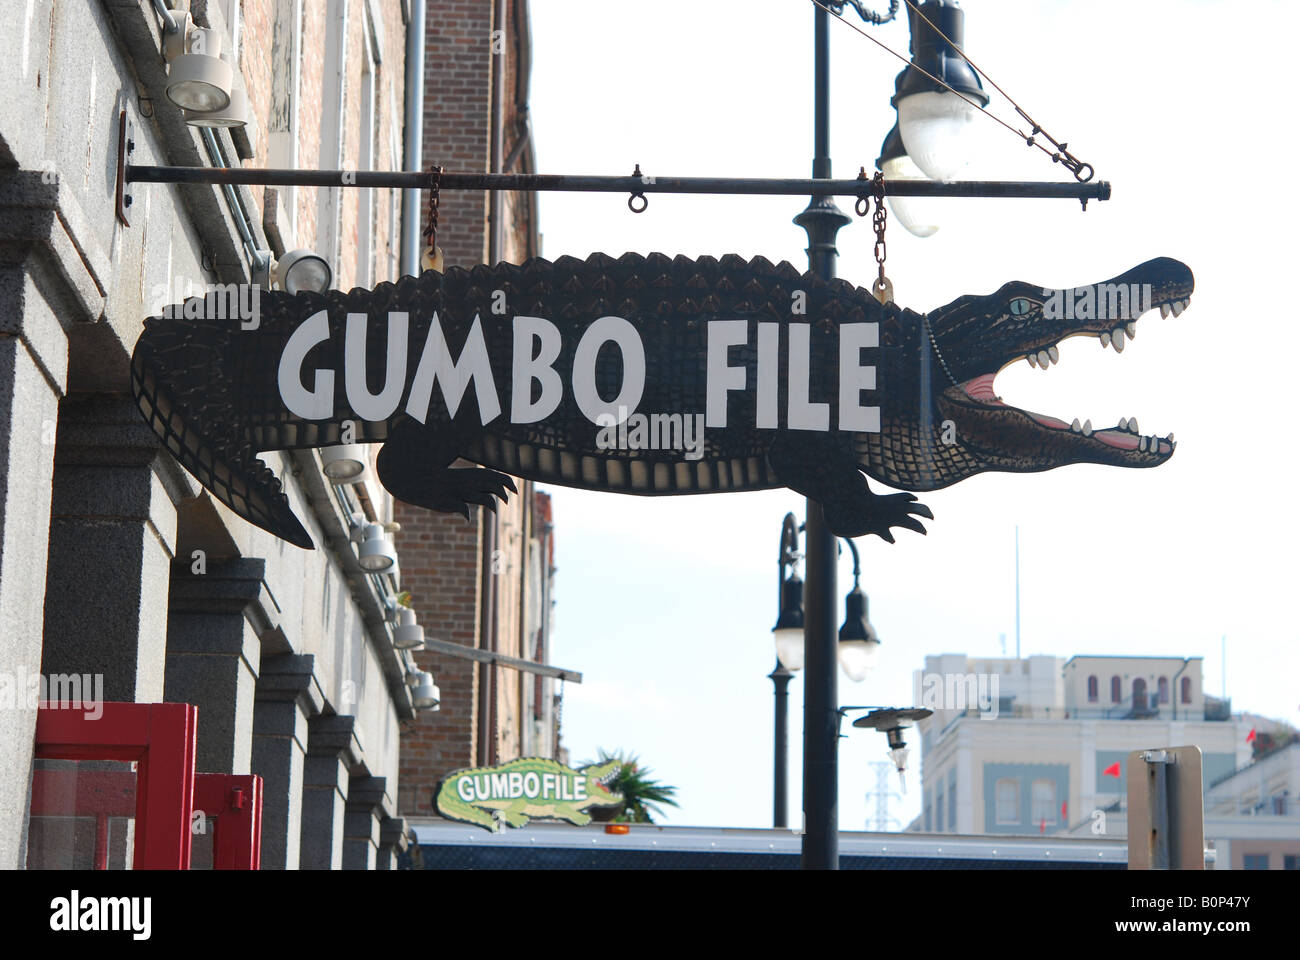 Gumbo File restaurant sign in the French Quarter of New Orleans, Louisiana. Stock Photo